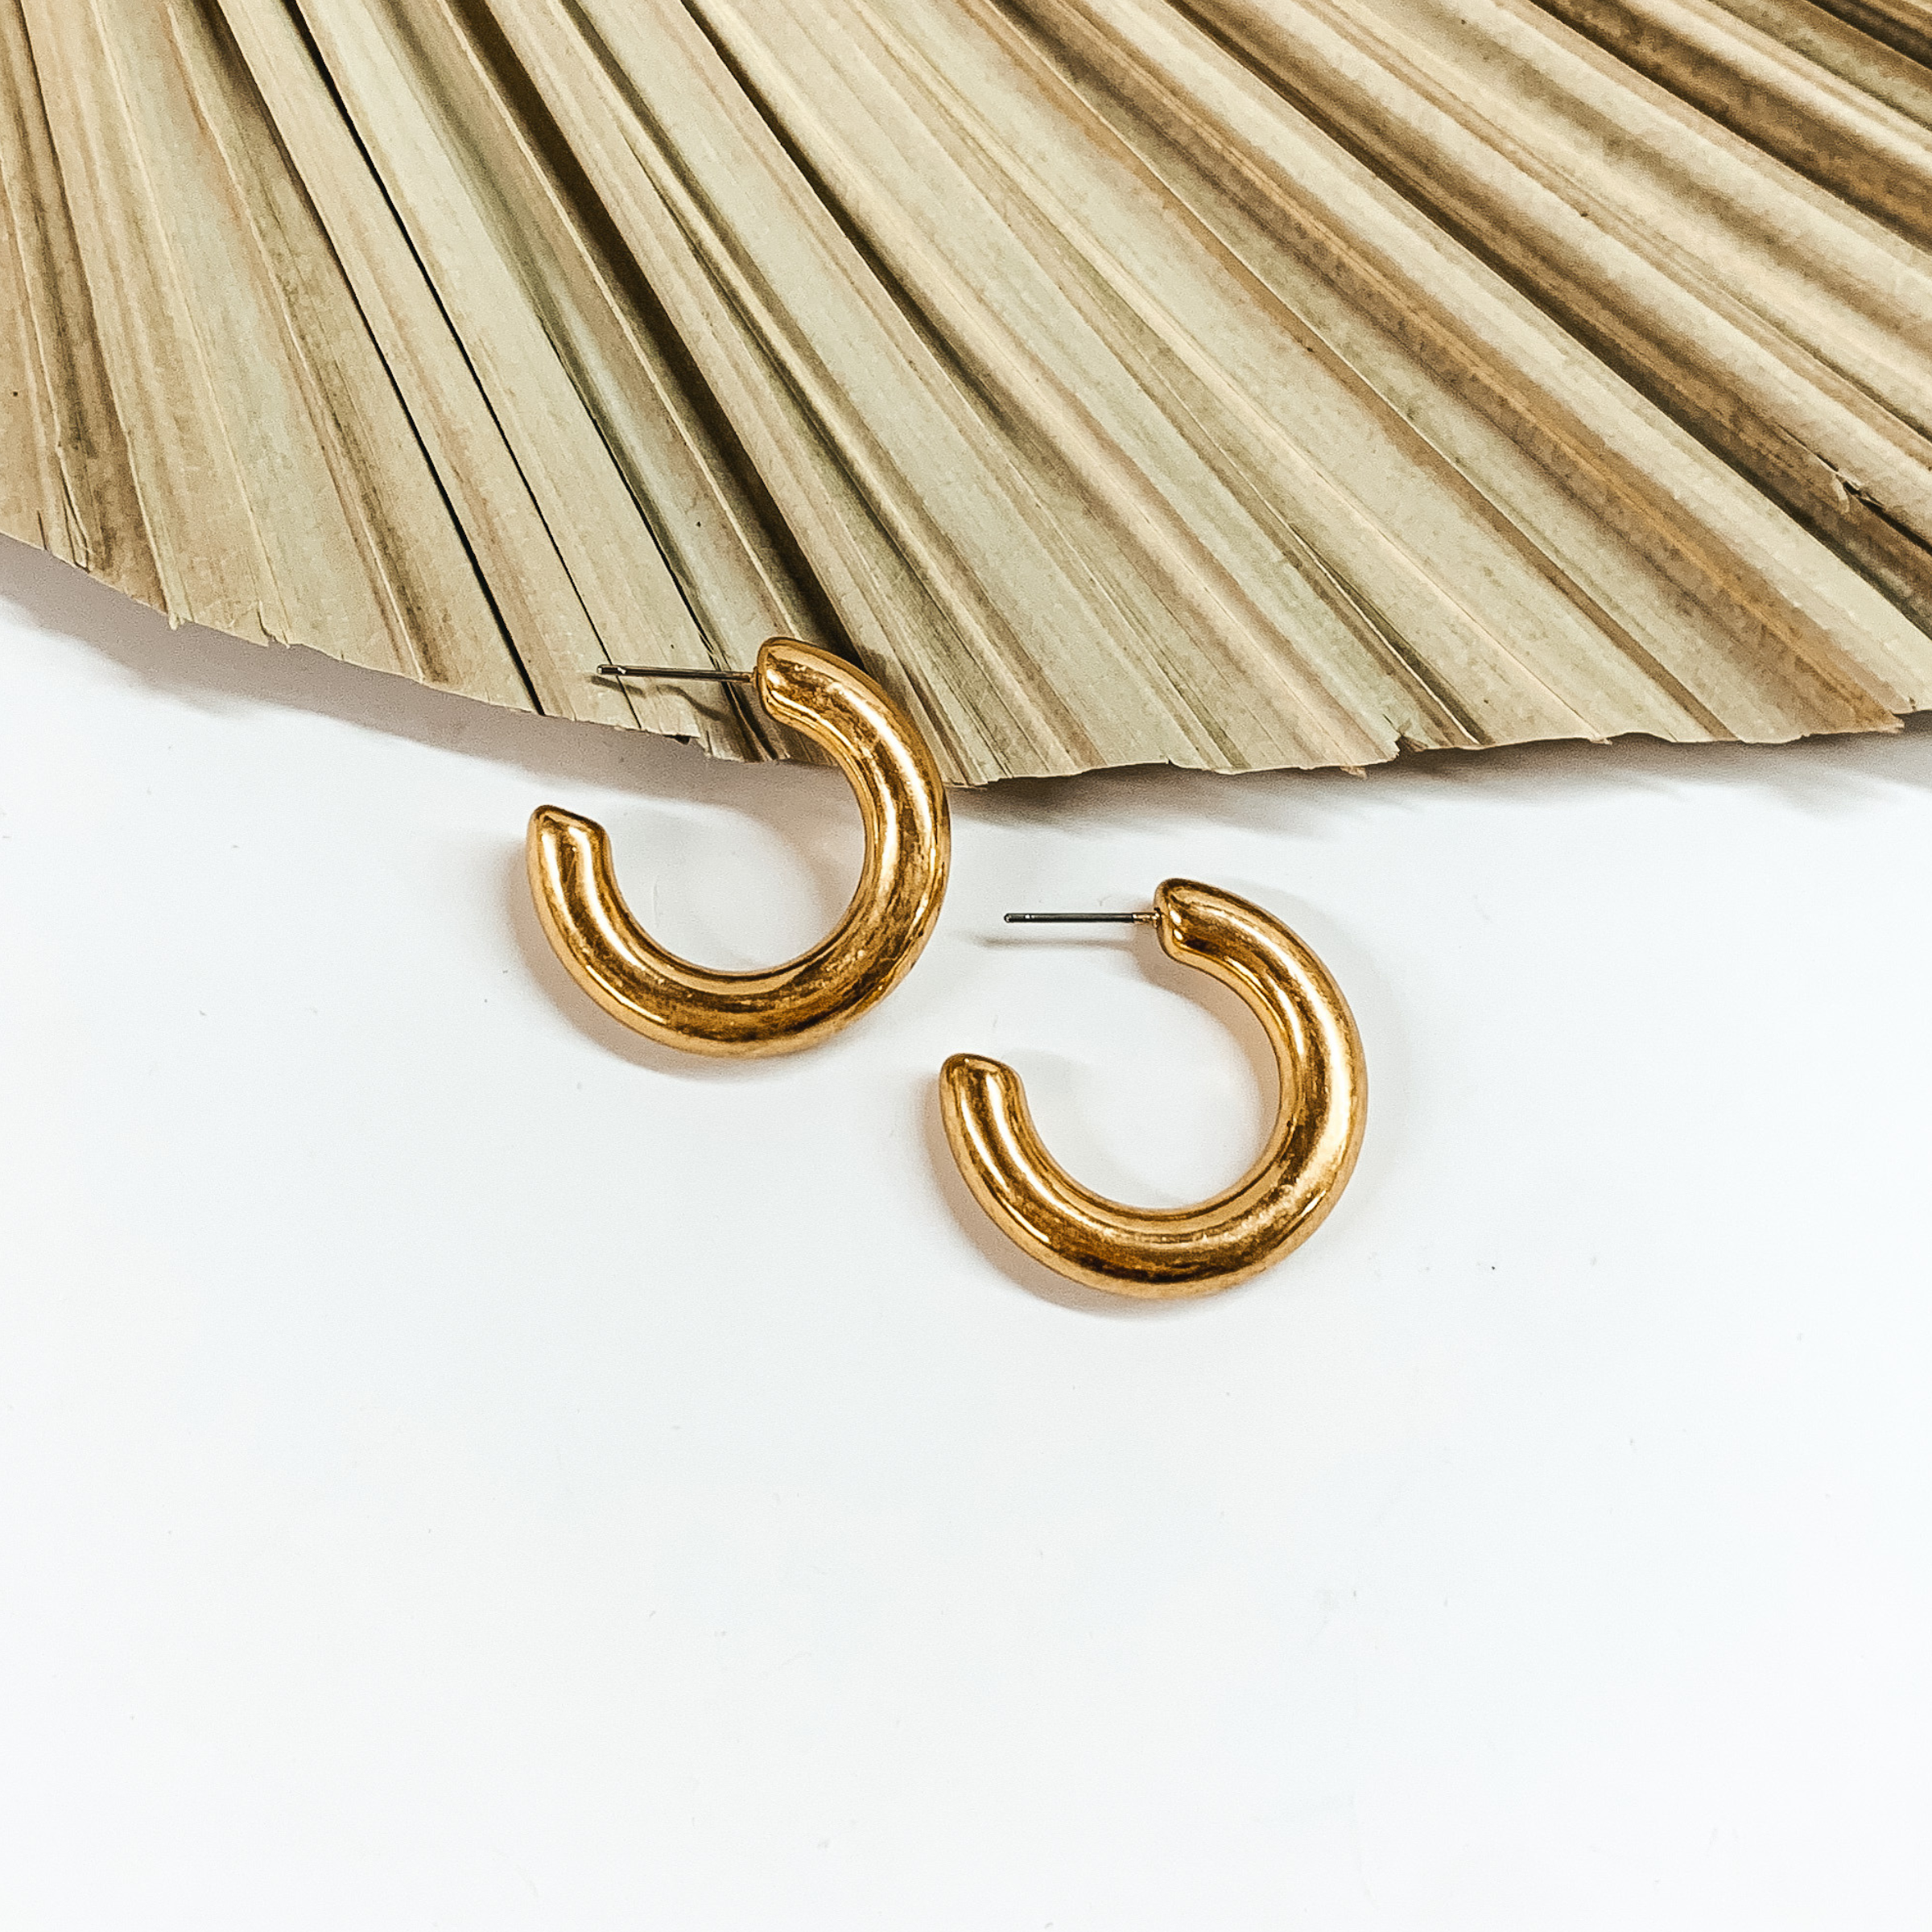 Clean Slate Small Hoop Earrings in Worn Gold Tone - Giddy Up Glamour Boutique